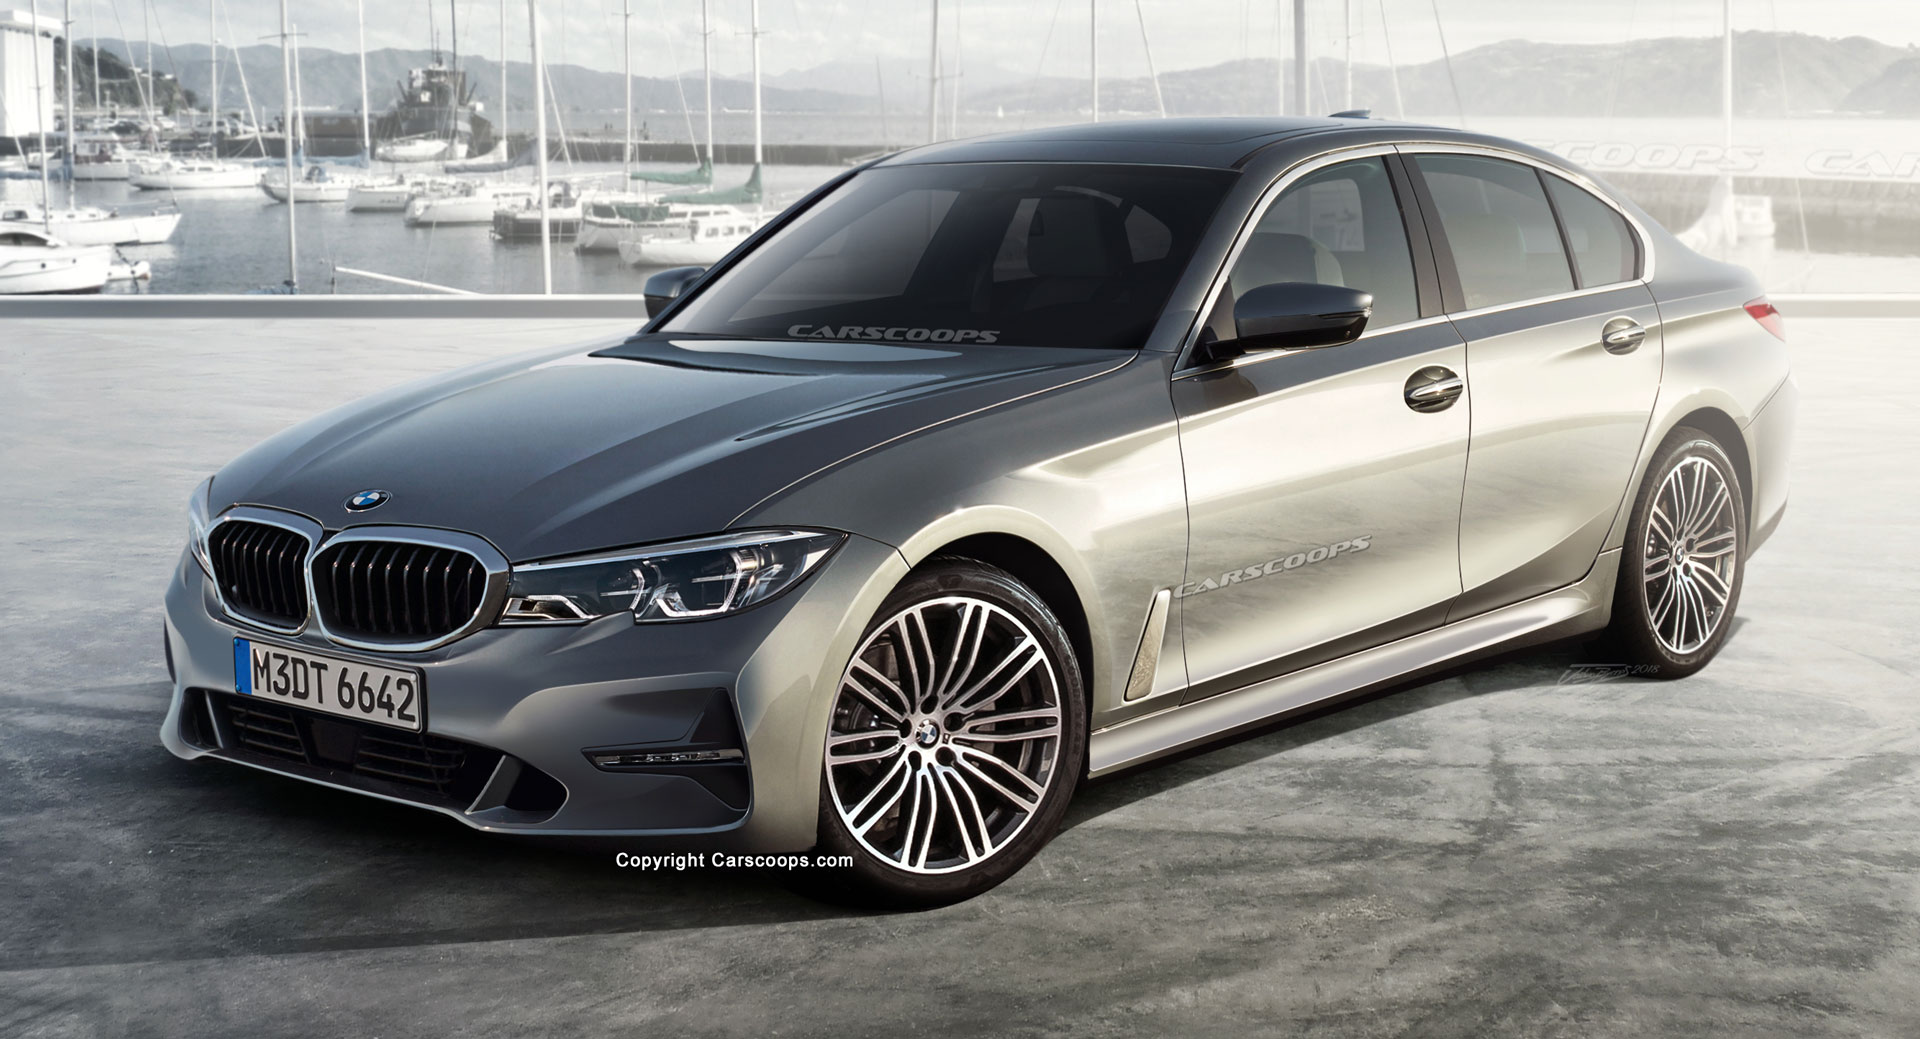 2019 BMW 3-Series: This Is What We Think The New G20 Will Look